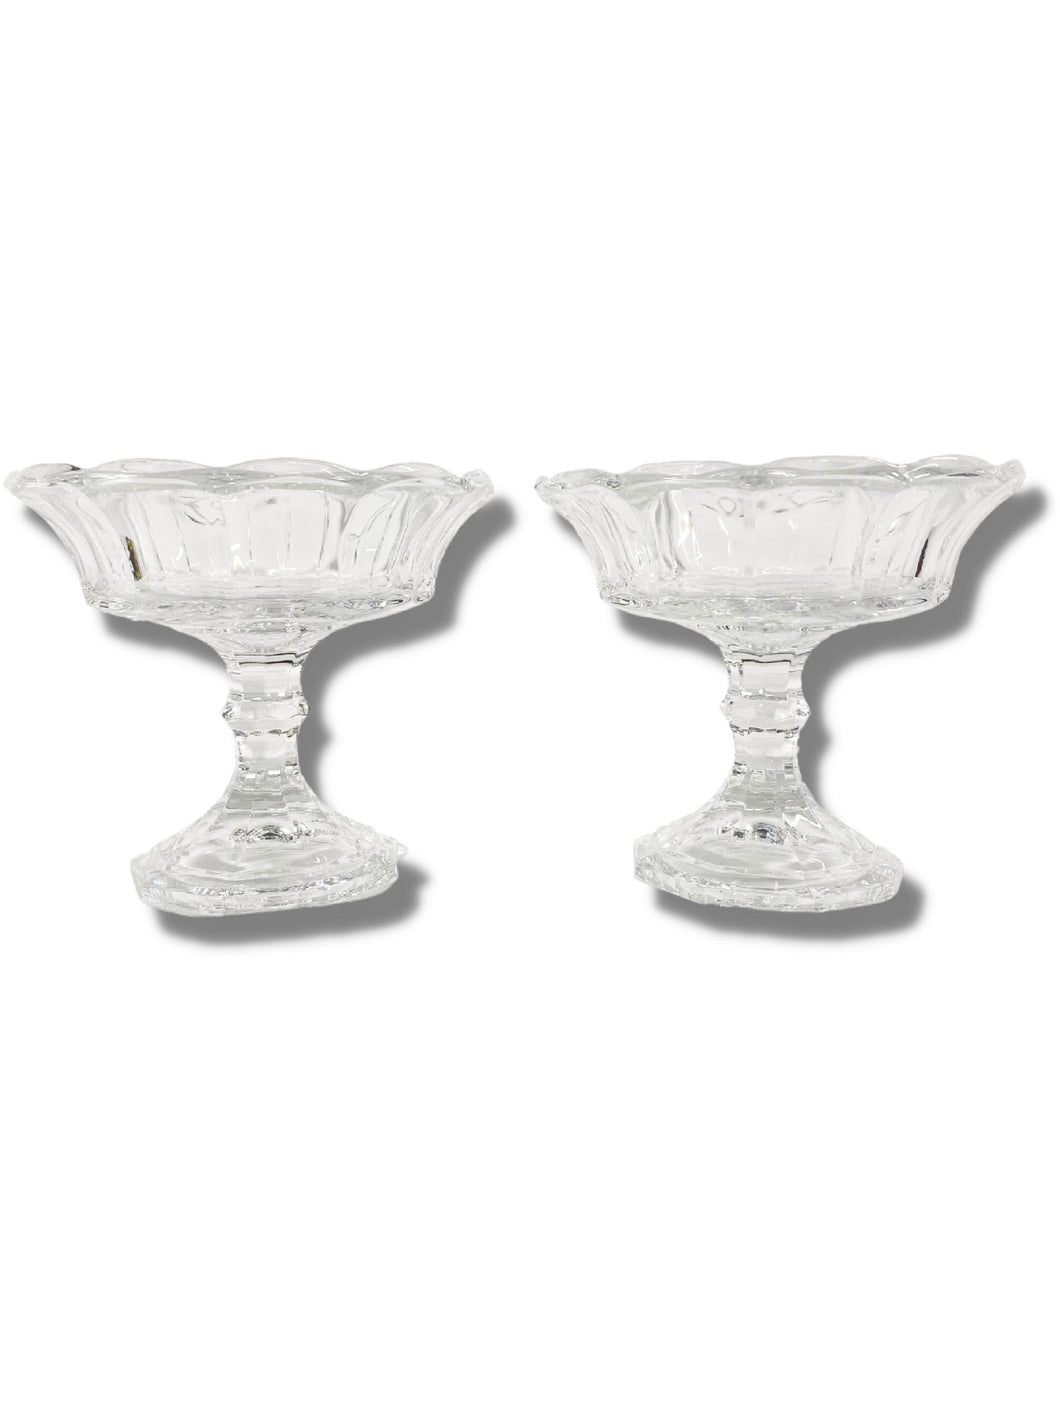 Victorian Dessert Dishes (Set of two)